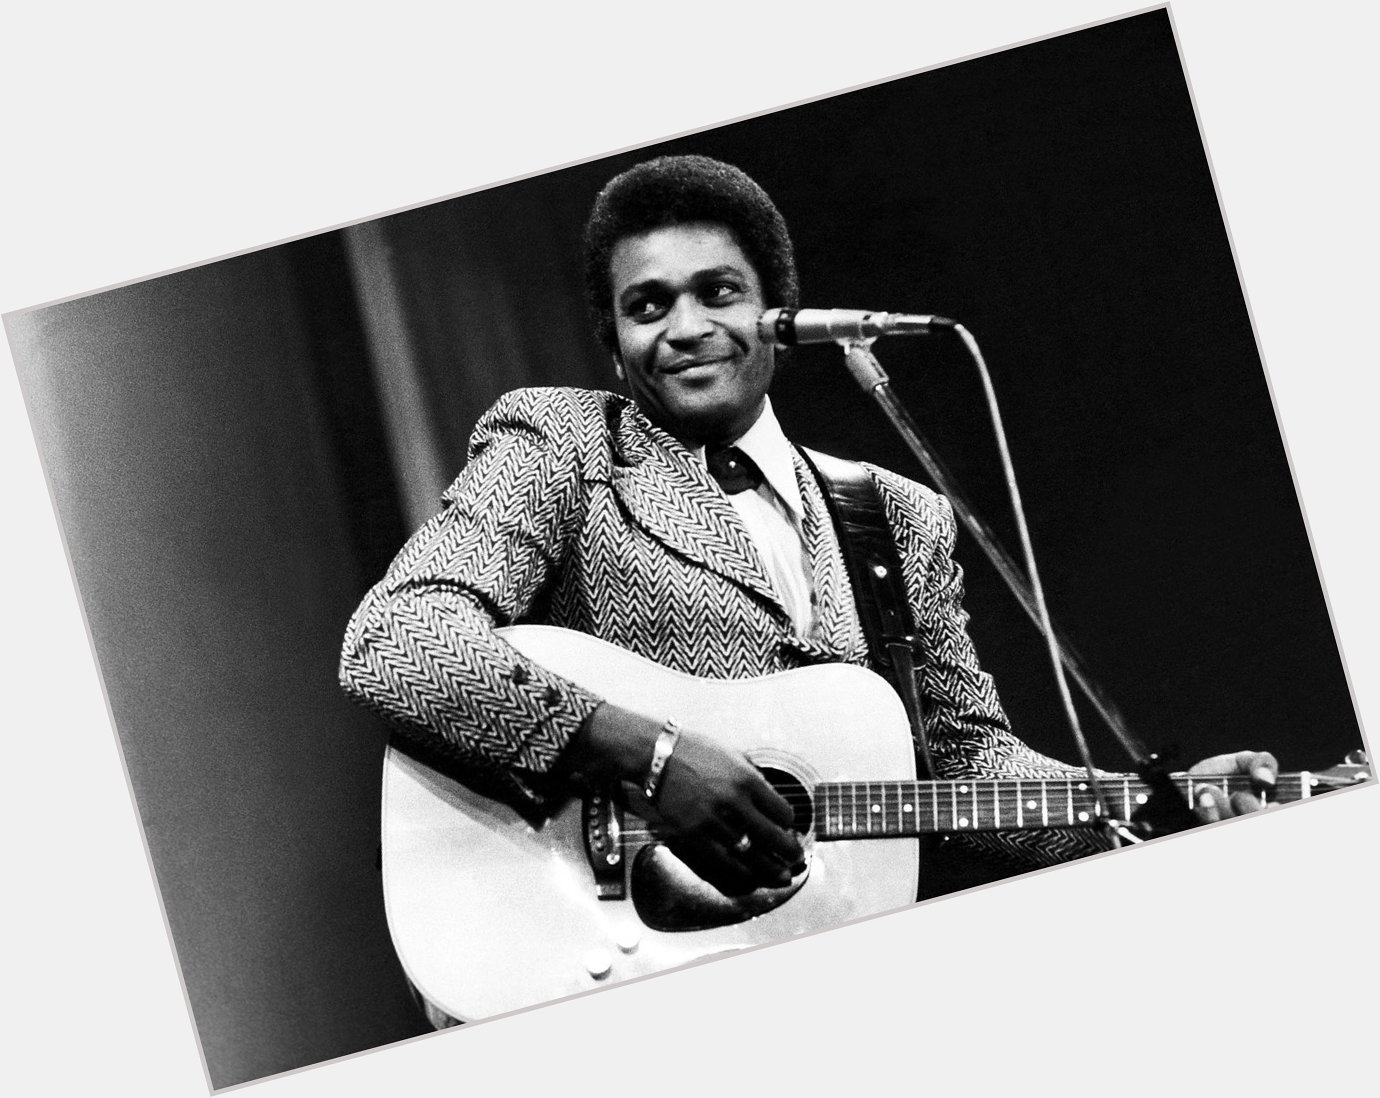 Happy Heavenly Birthday to Charley Pride March 18th. Will always adore him. 